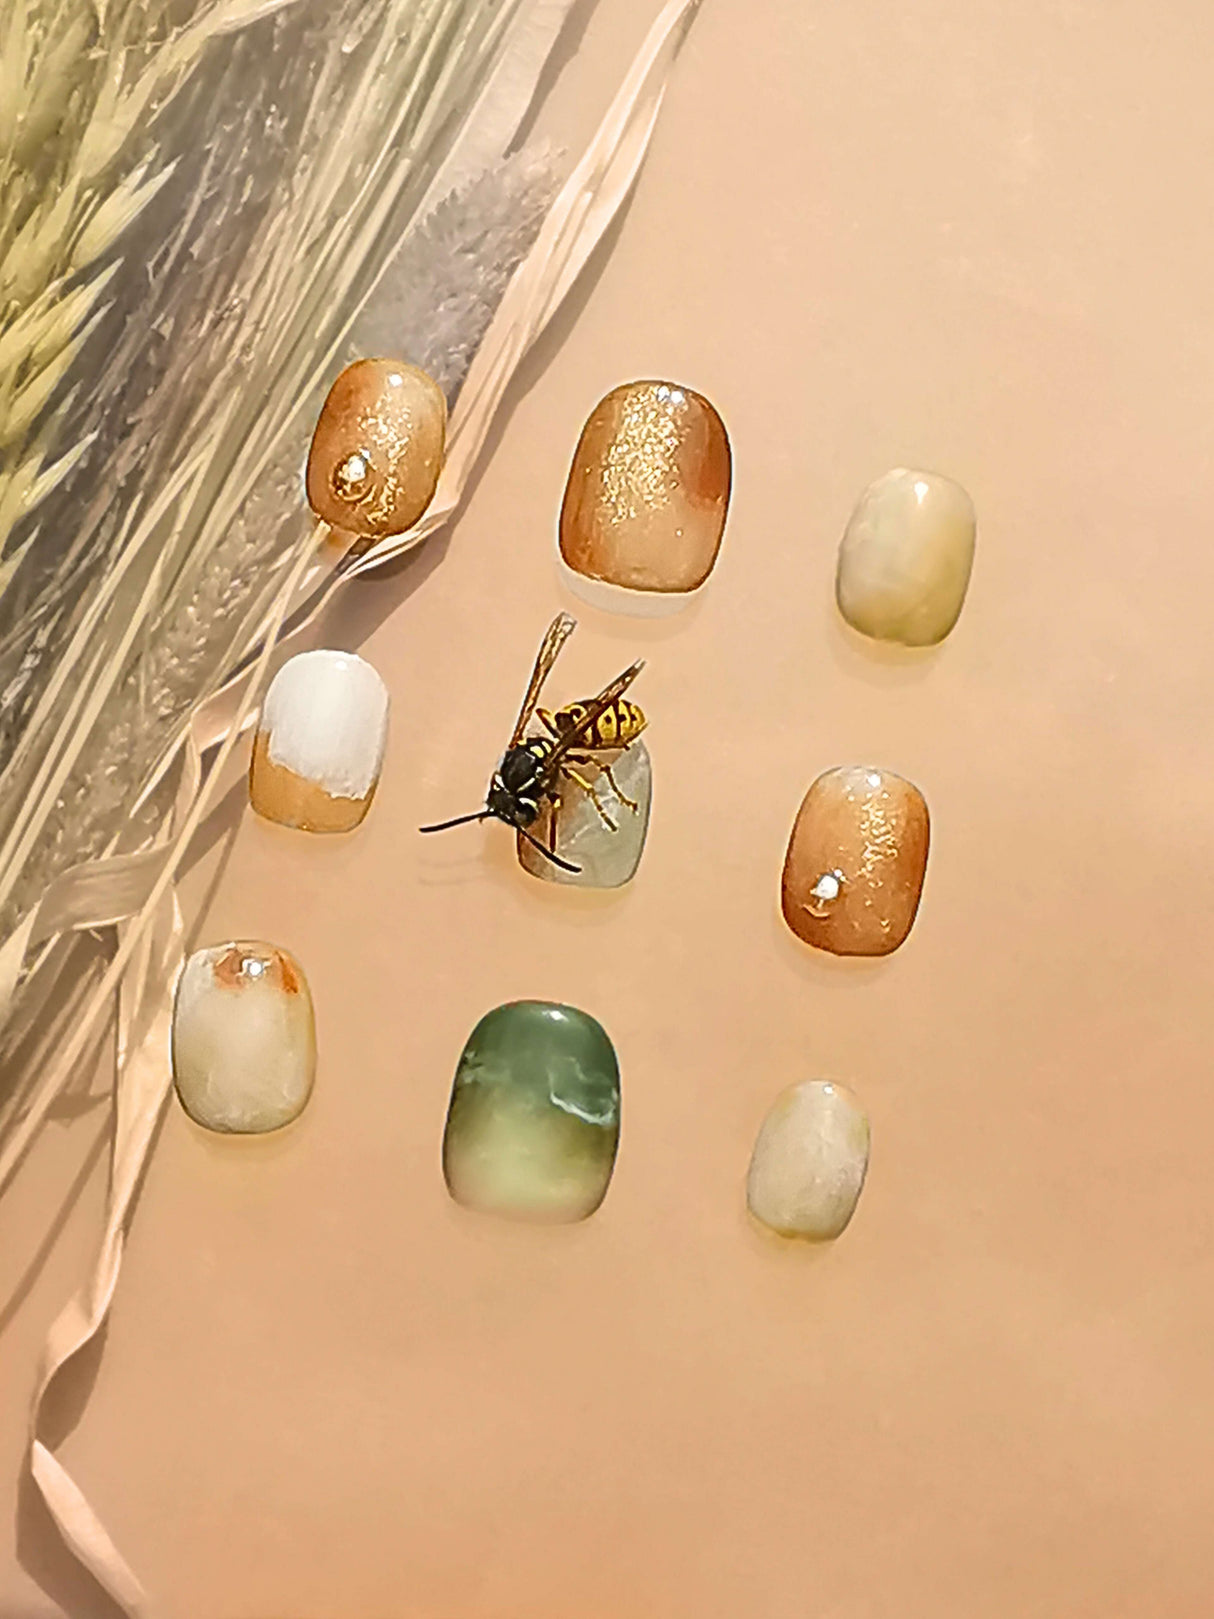 These press-on nails feature earthy colors, metallic accents, and a realistic-looking wasp for a chic and organic look that complements a natural and minimalist fashion style.